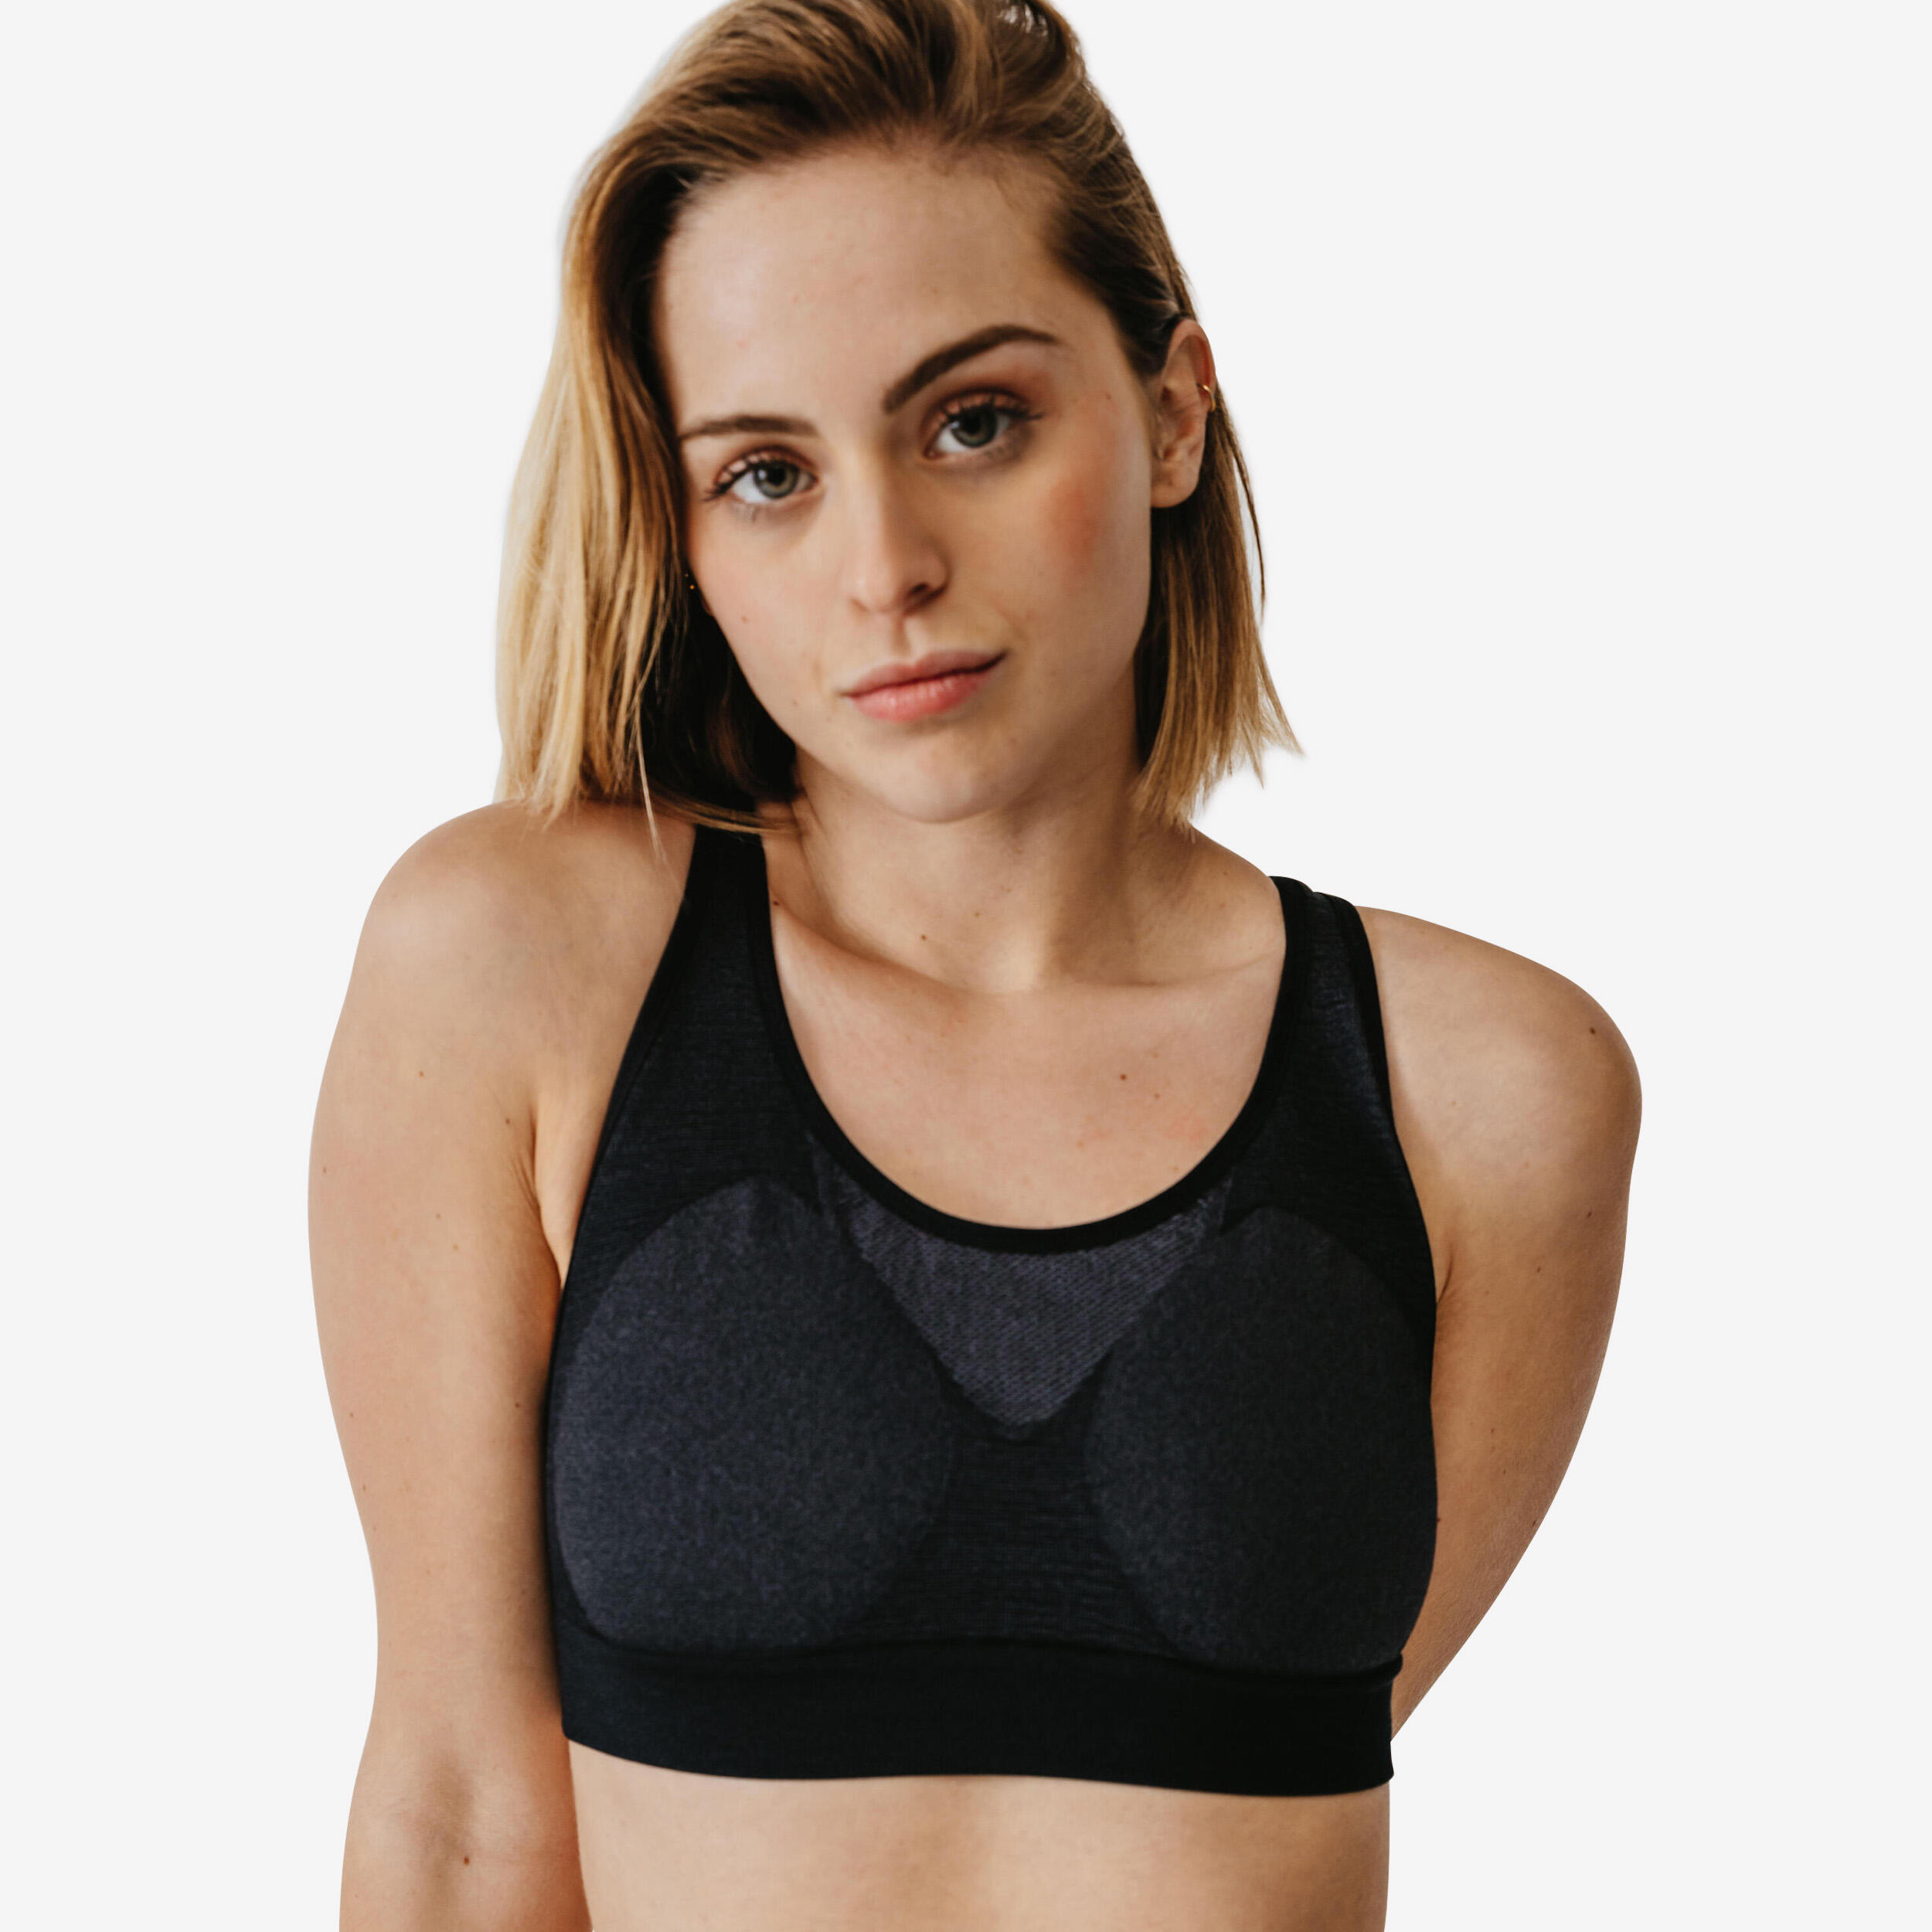 RUNNING BRA SIZE SIZE PLUS: SUPERIOR SUPPORT CUP SIZES E TO H - Decathlon